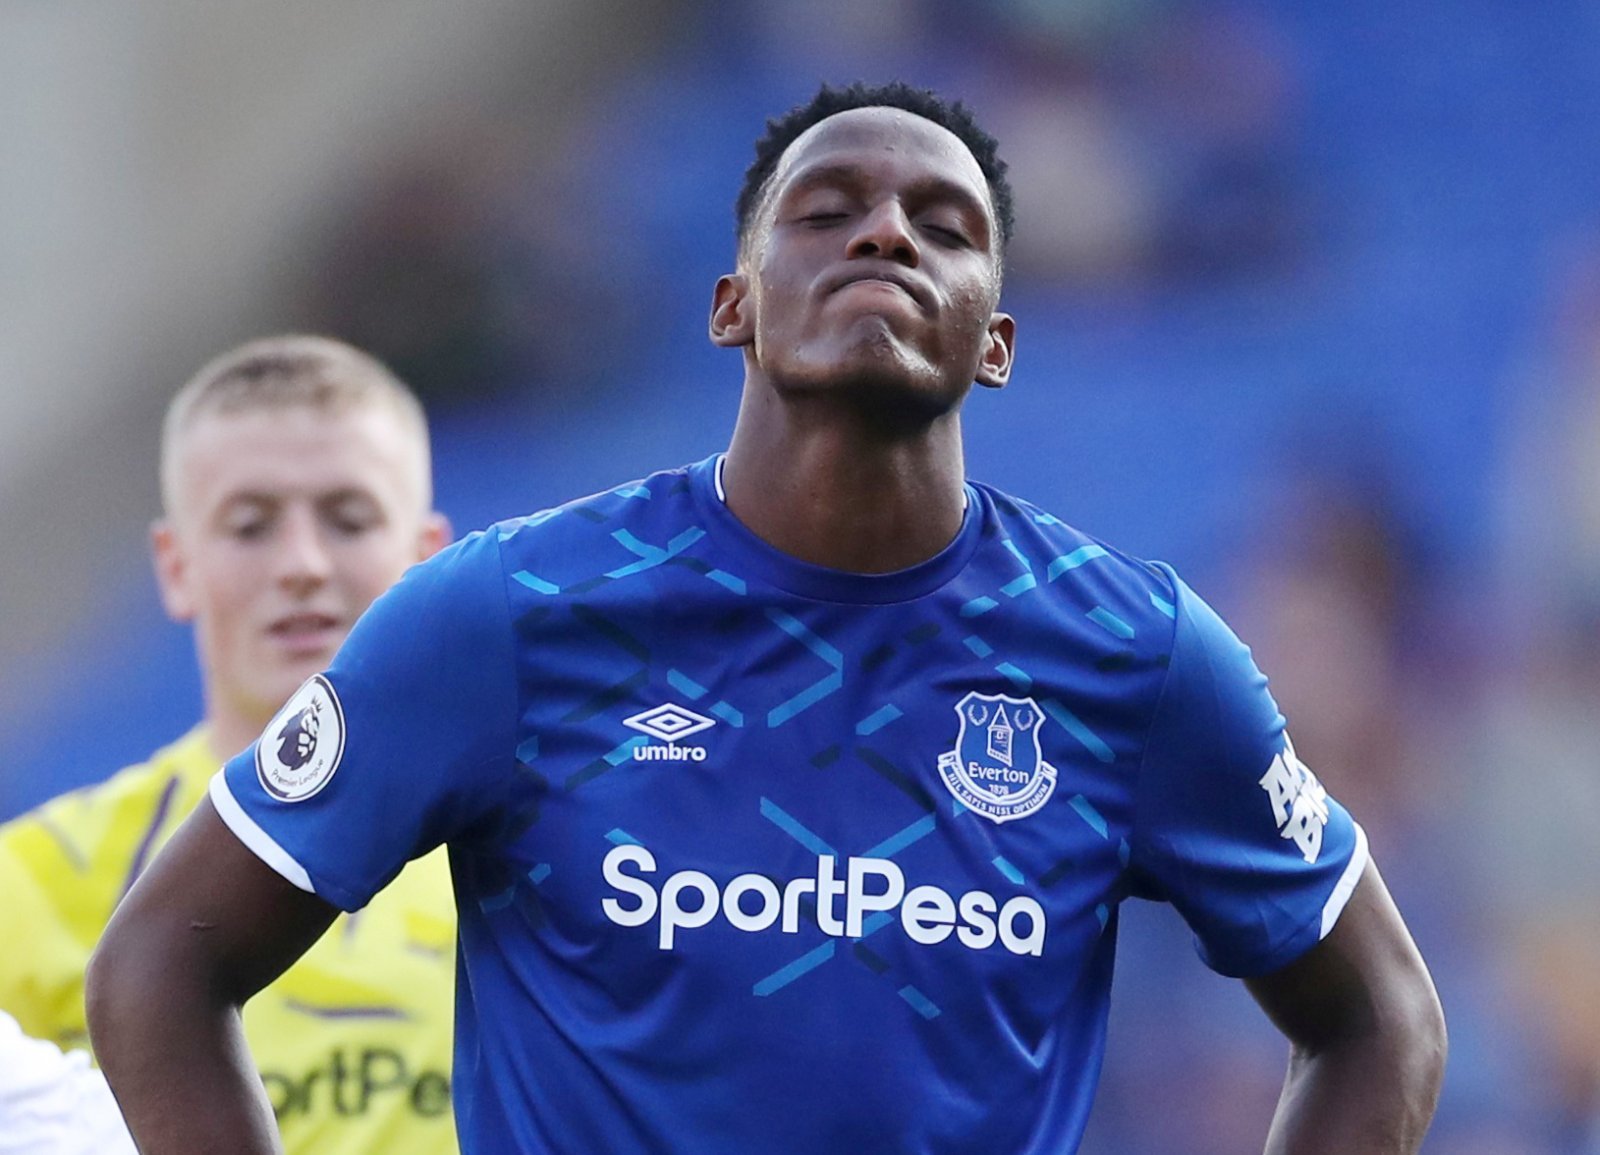 Everton's Yerry Mina looks dejected after the Sheffield United match